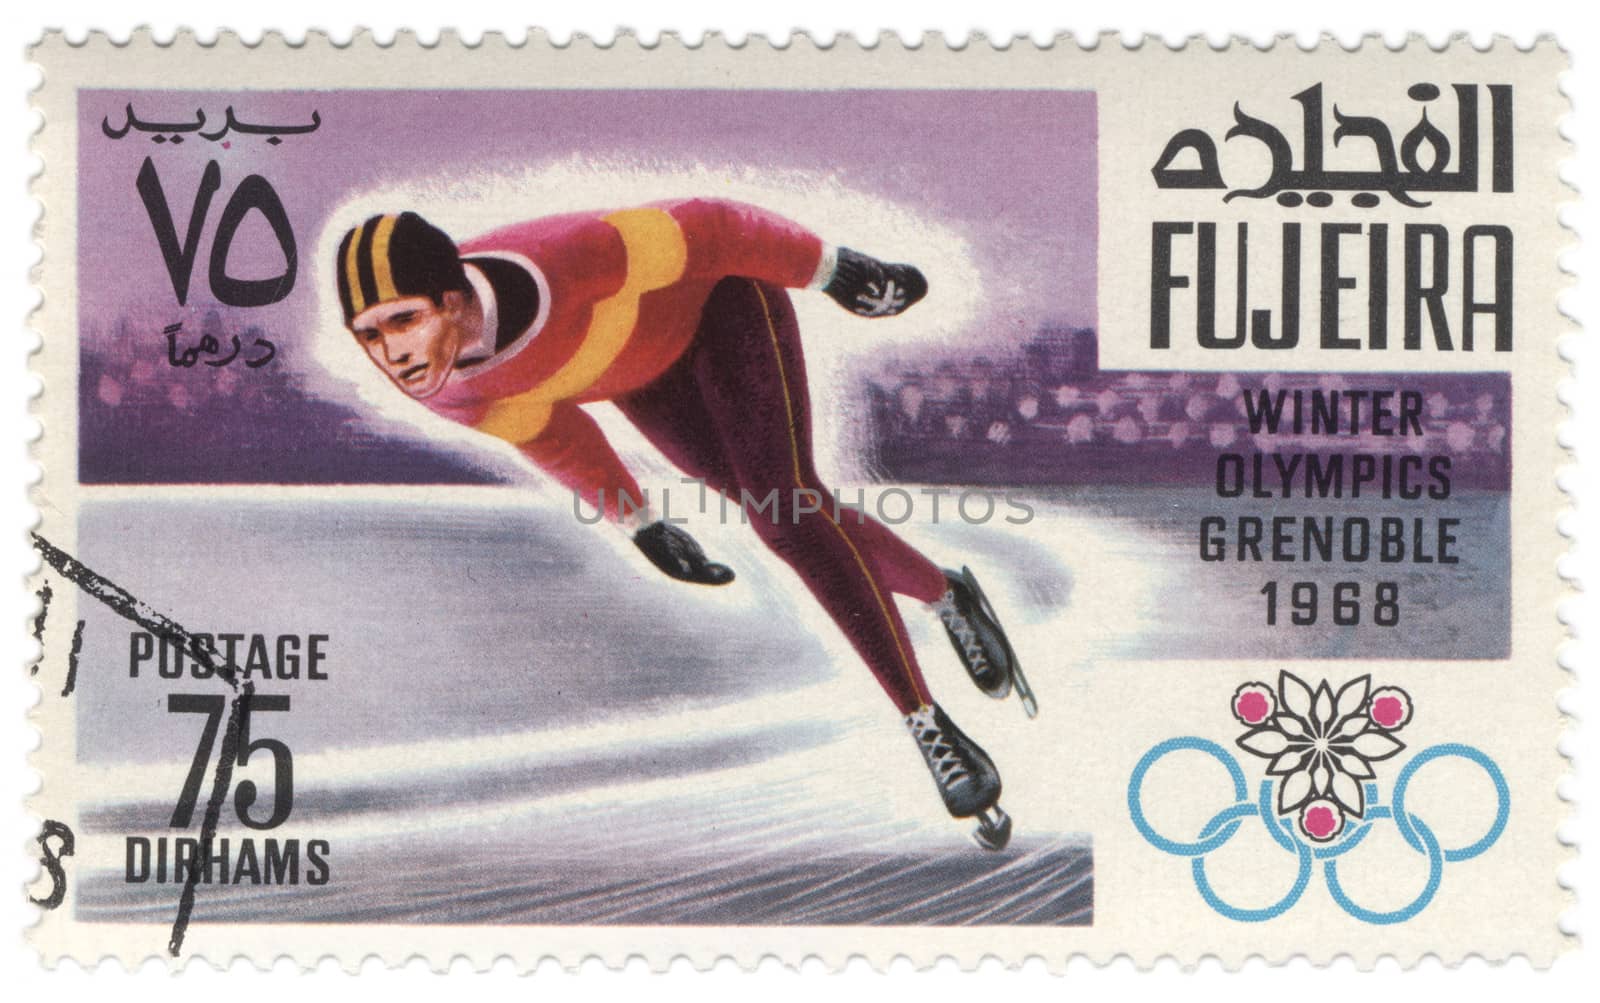 Running skater at the Winter Olympics in Grenoble on postage sta by wander